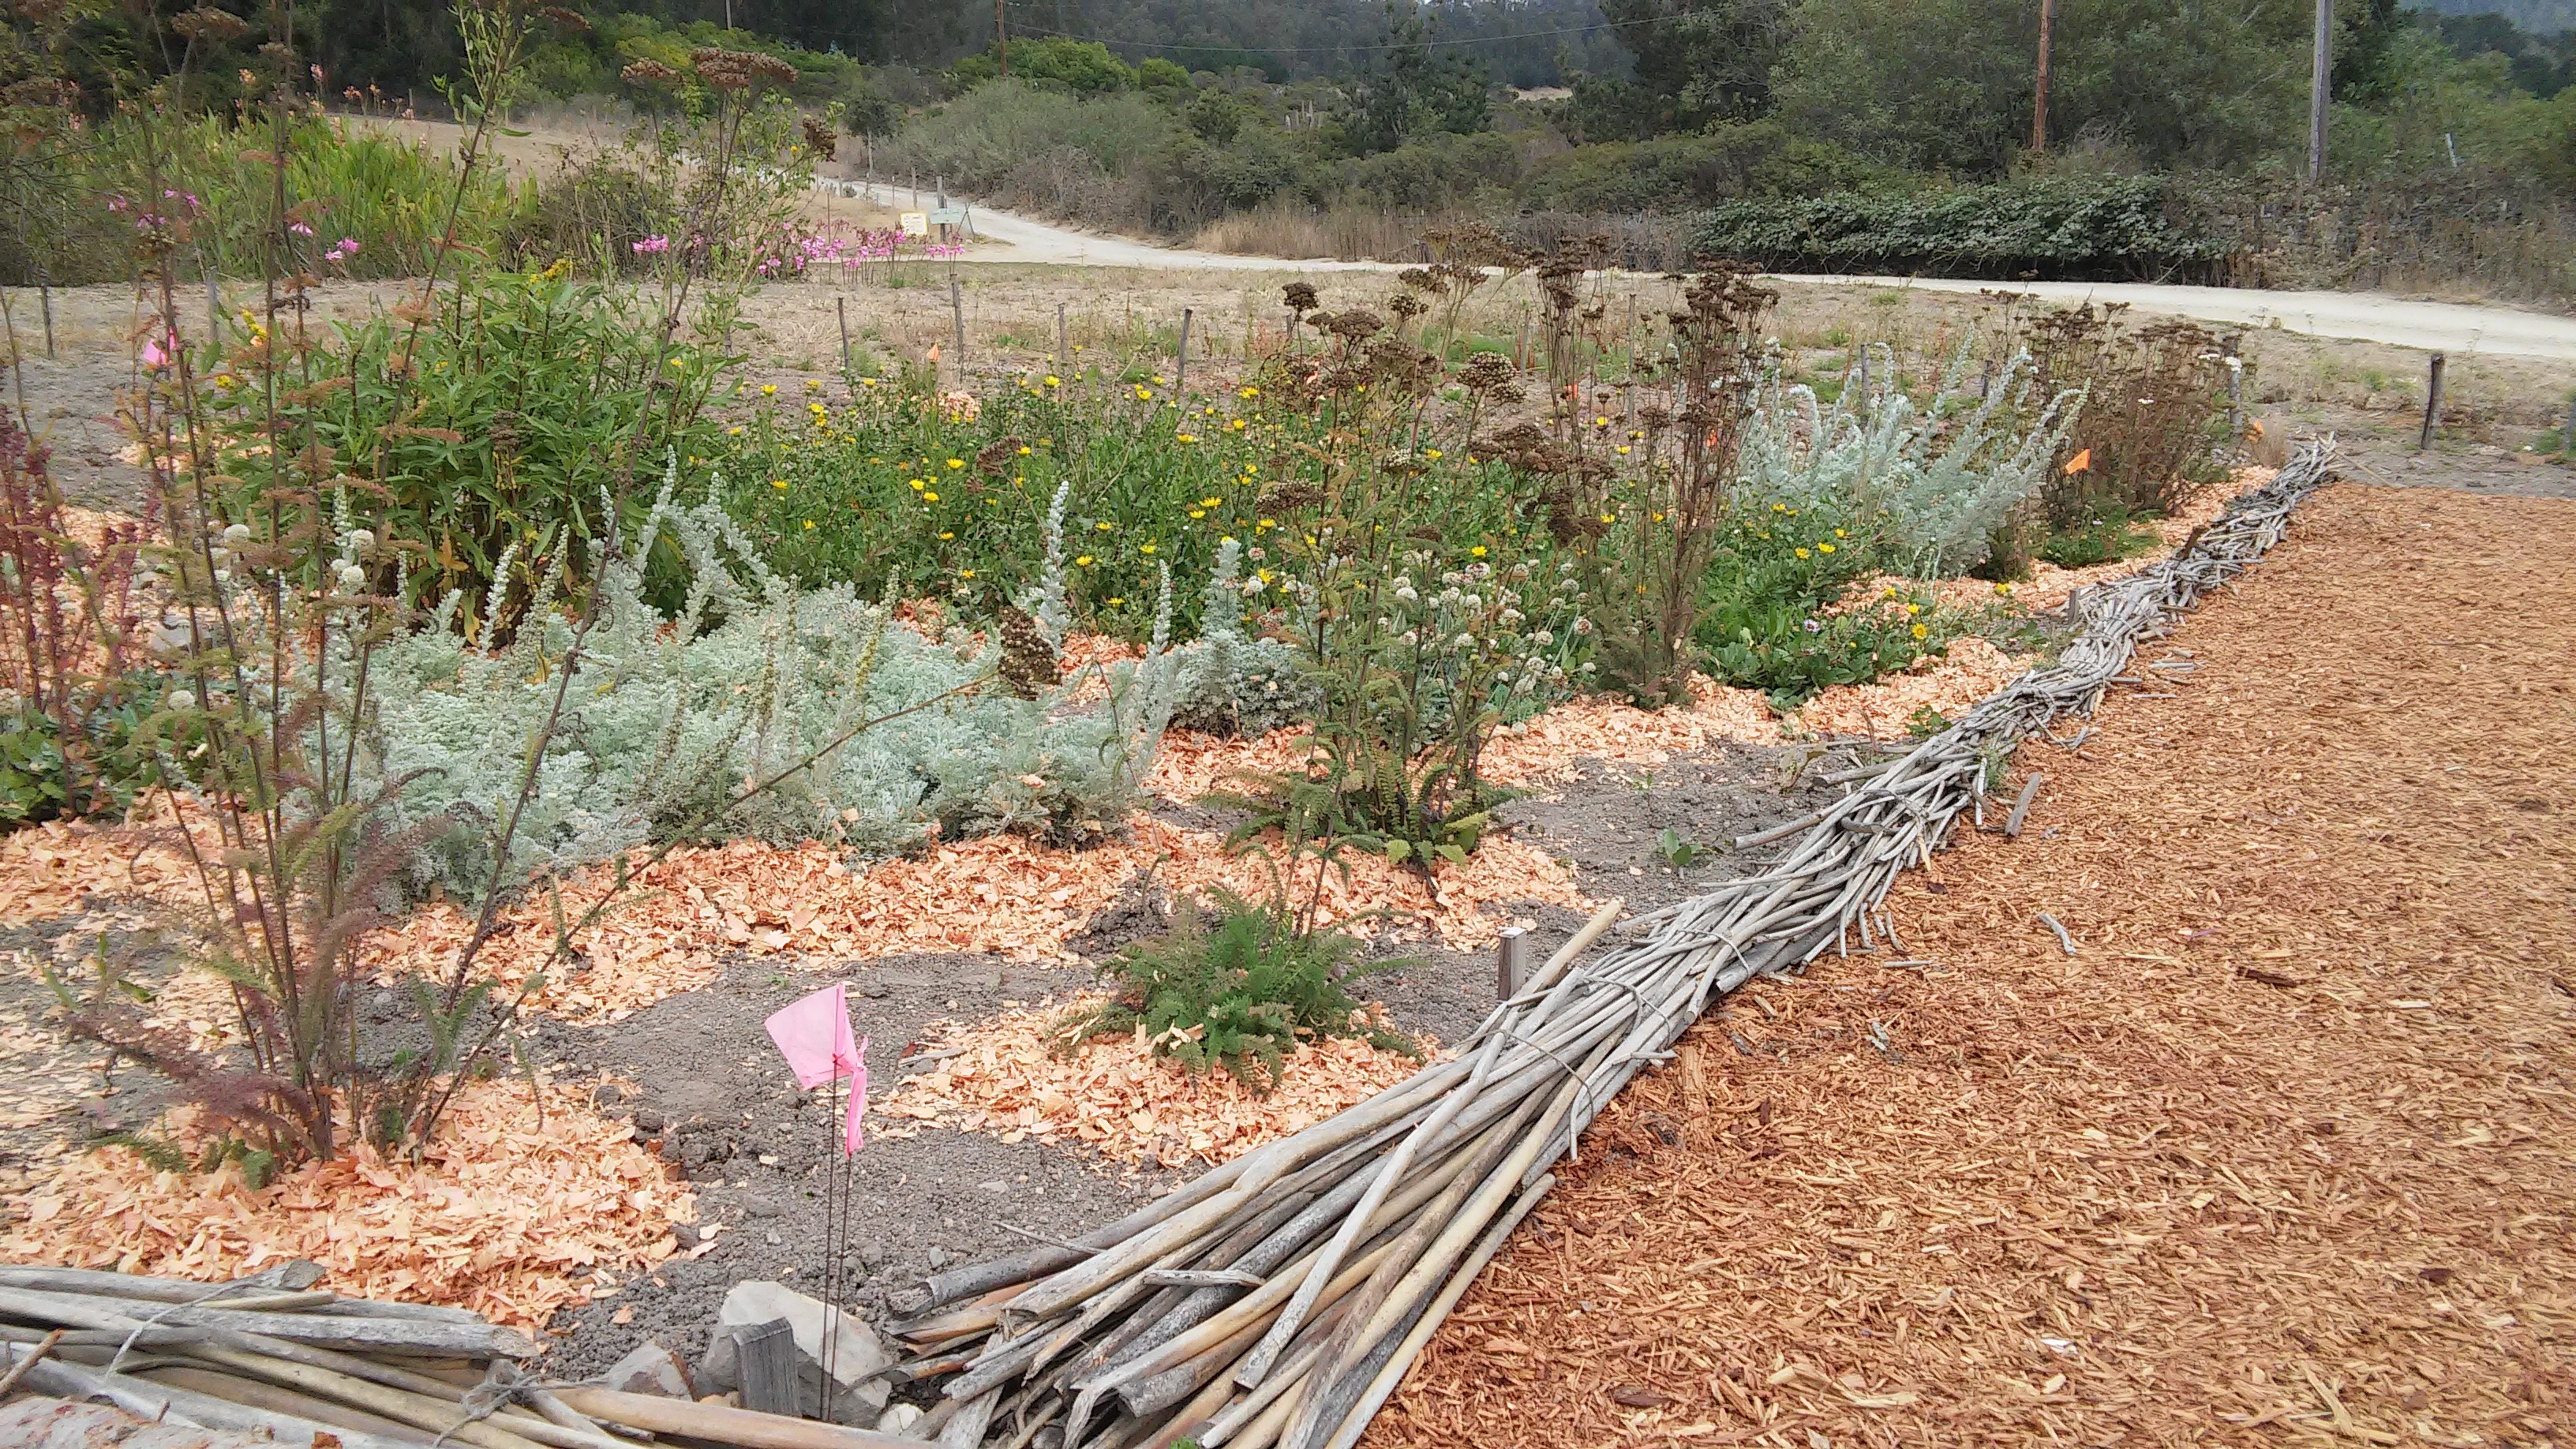 Rapid plant growth at the Pie Ranch Mutsun Garden. Garden pathways and native plantings were mulched during the course of NSC this summer, keeping down weeds and mud and providing nutrients and moisture to developing transplants.